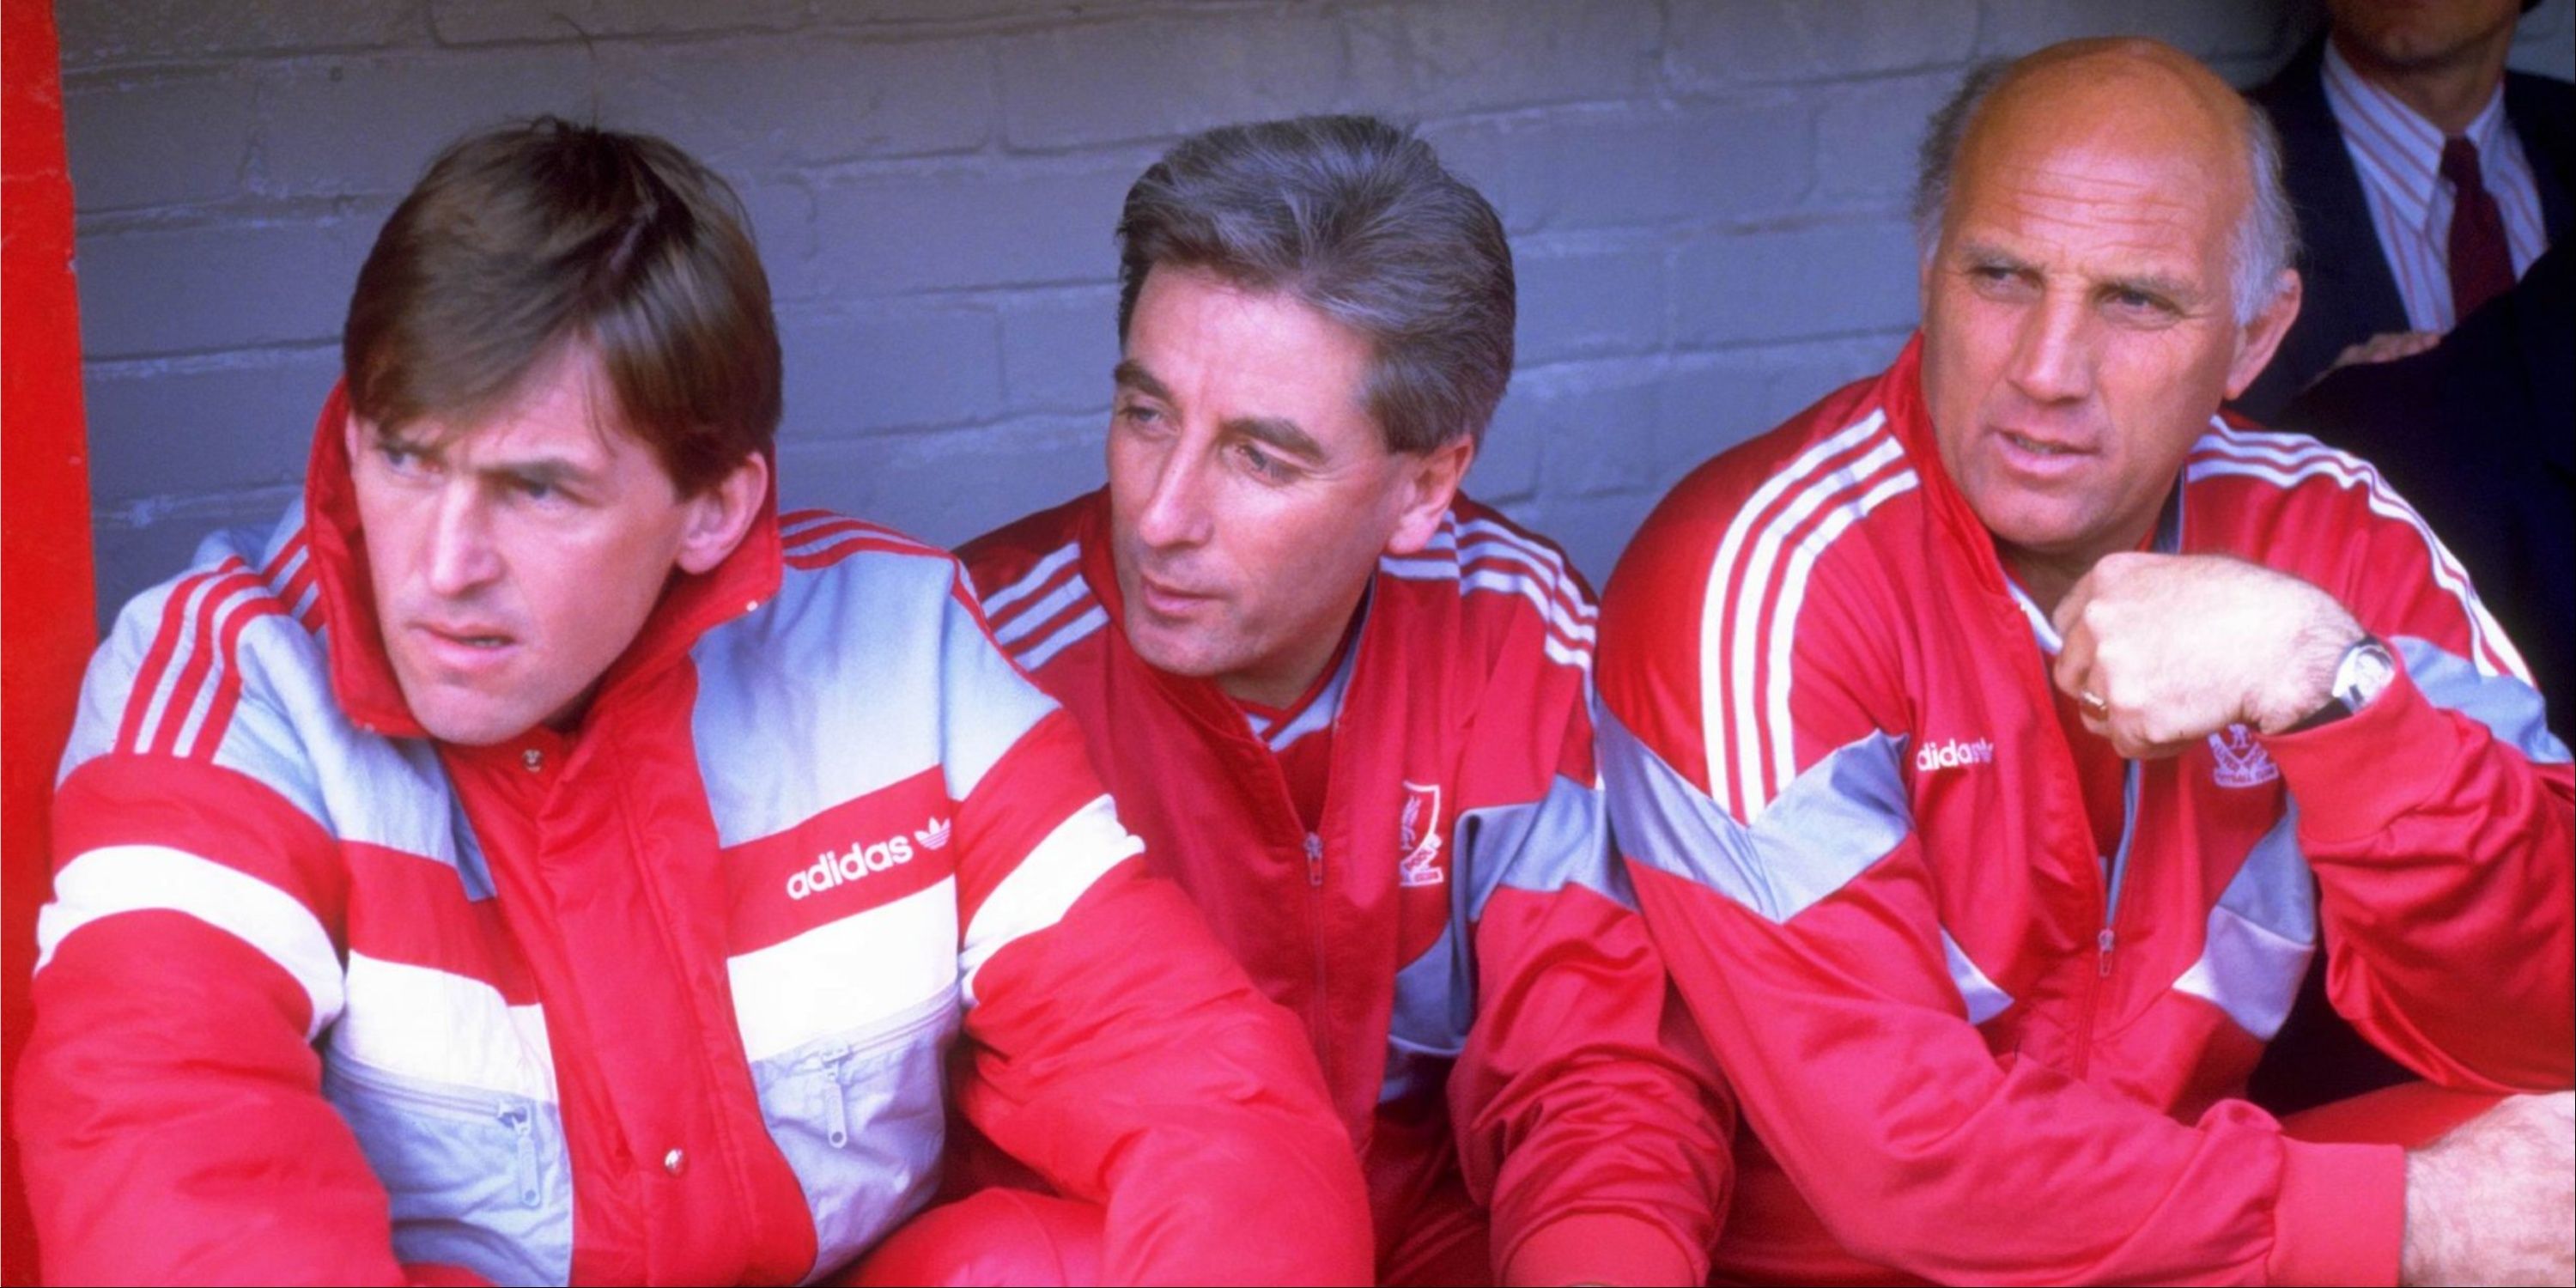 Liverpool manager Kenny Dalglish sat in the dugout alongside Roy Evans and Ronnie Moran.